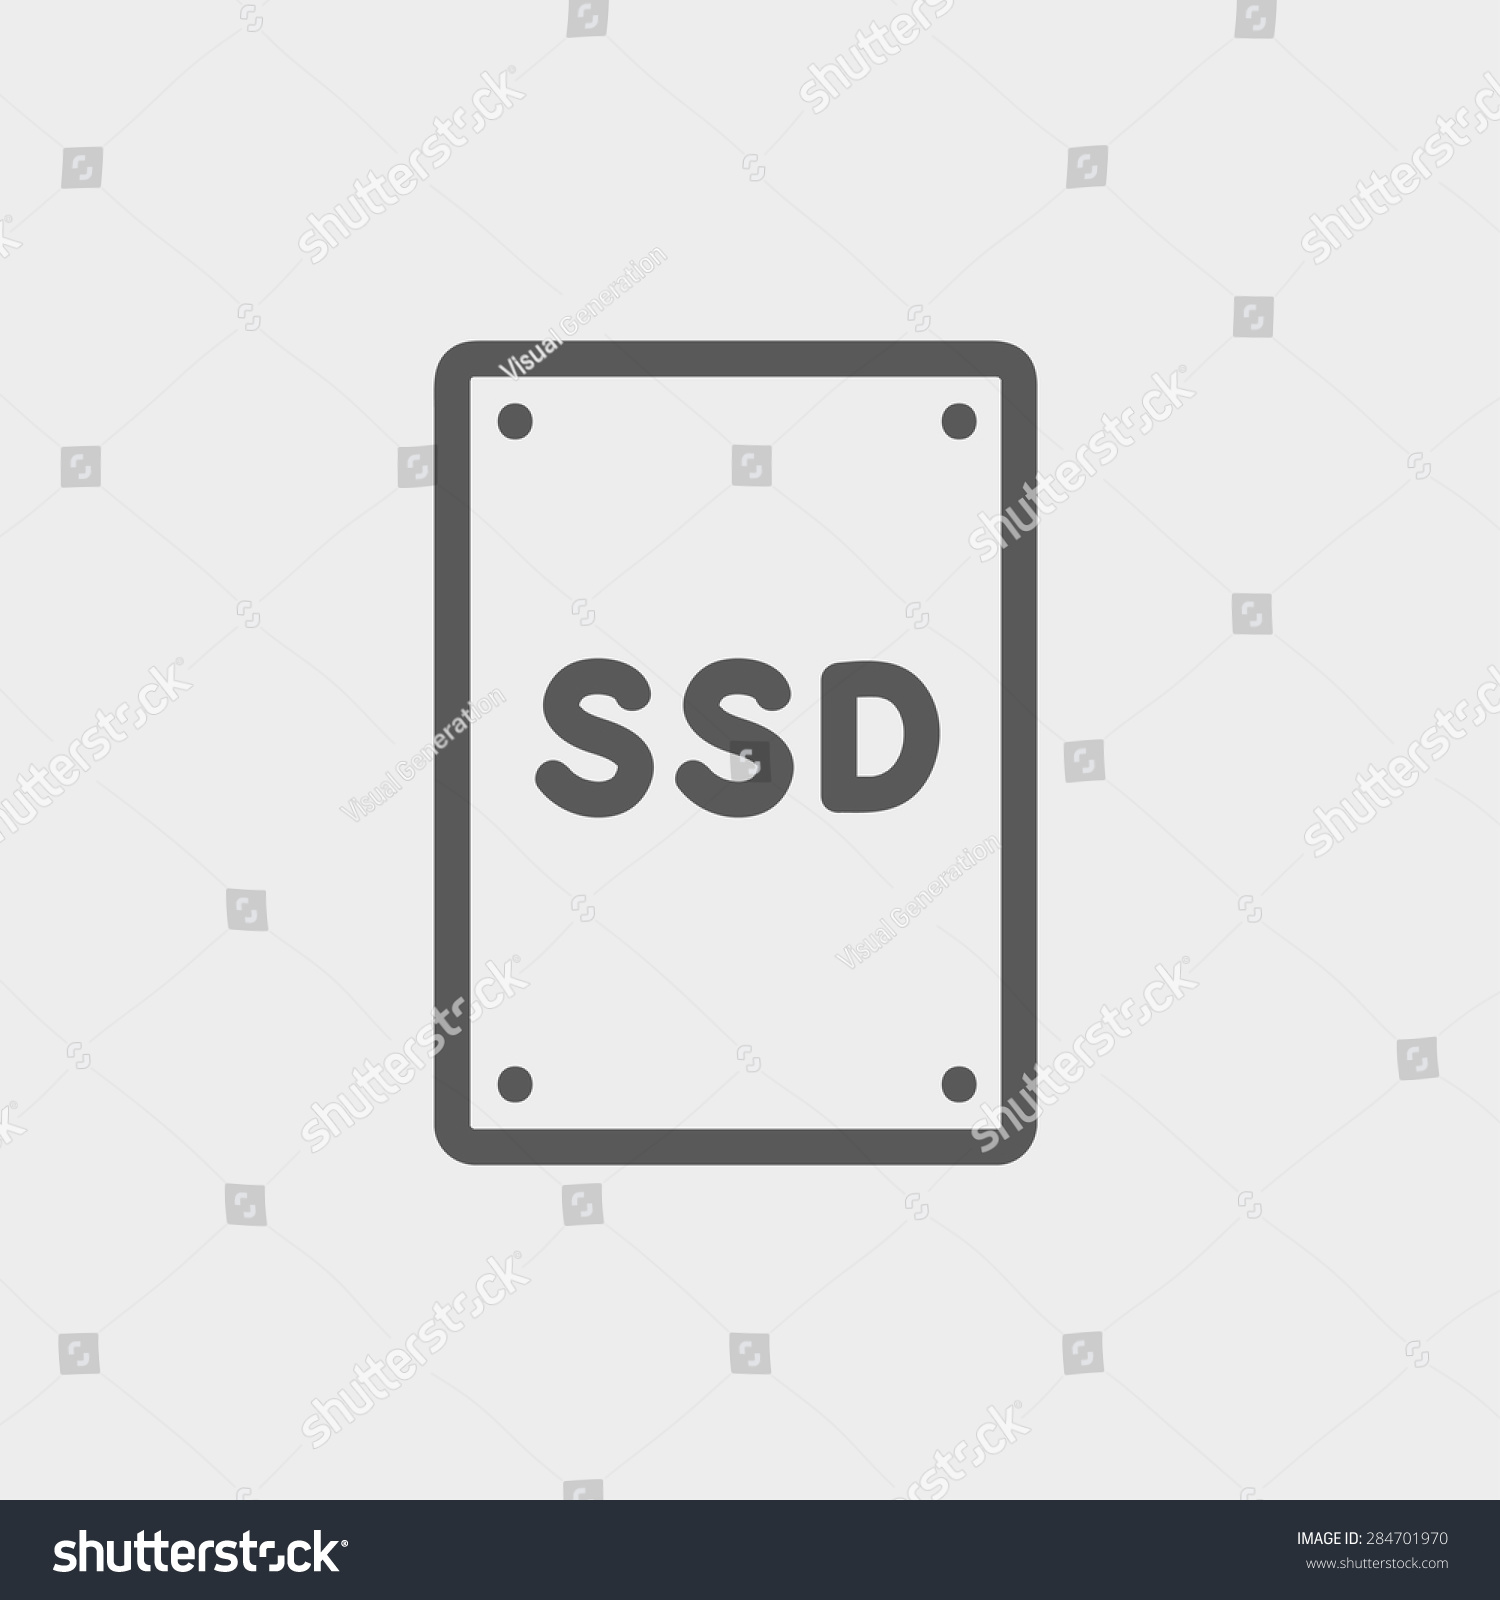 Color icon - solid state drive. Solid state drive icon in 